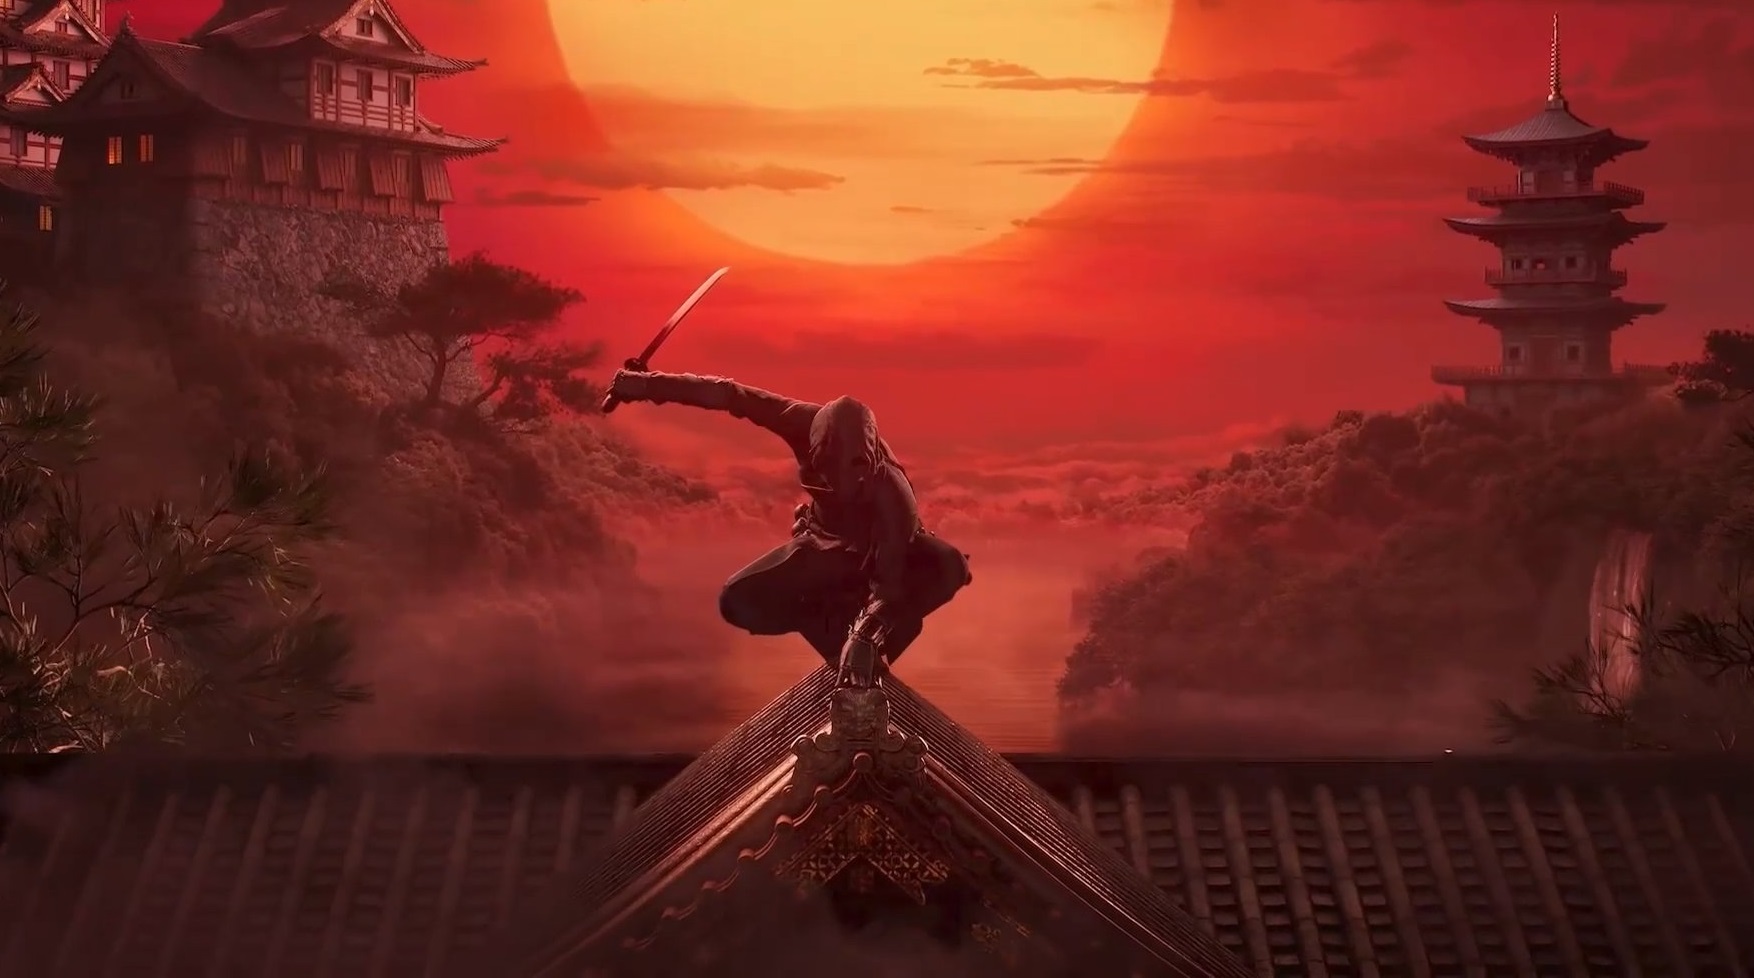 Assassin’s Creed is going to feudal Japan, China, and beyond
in 3 new games